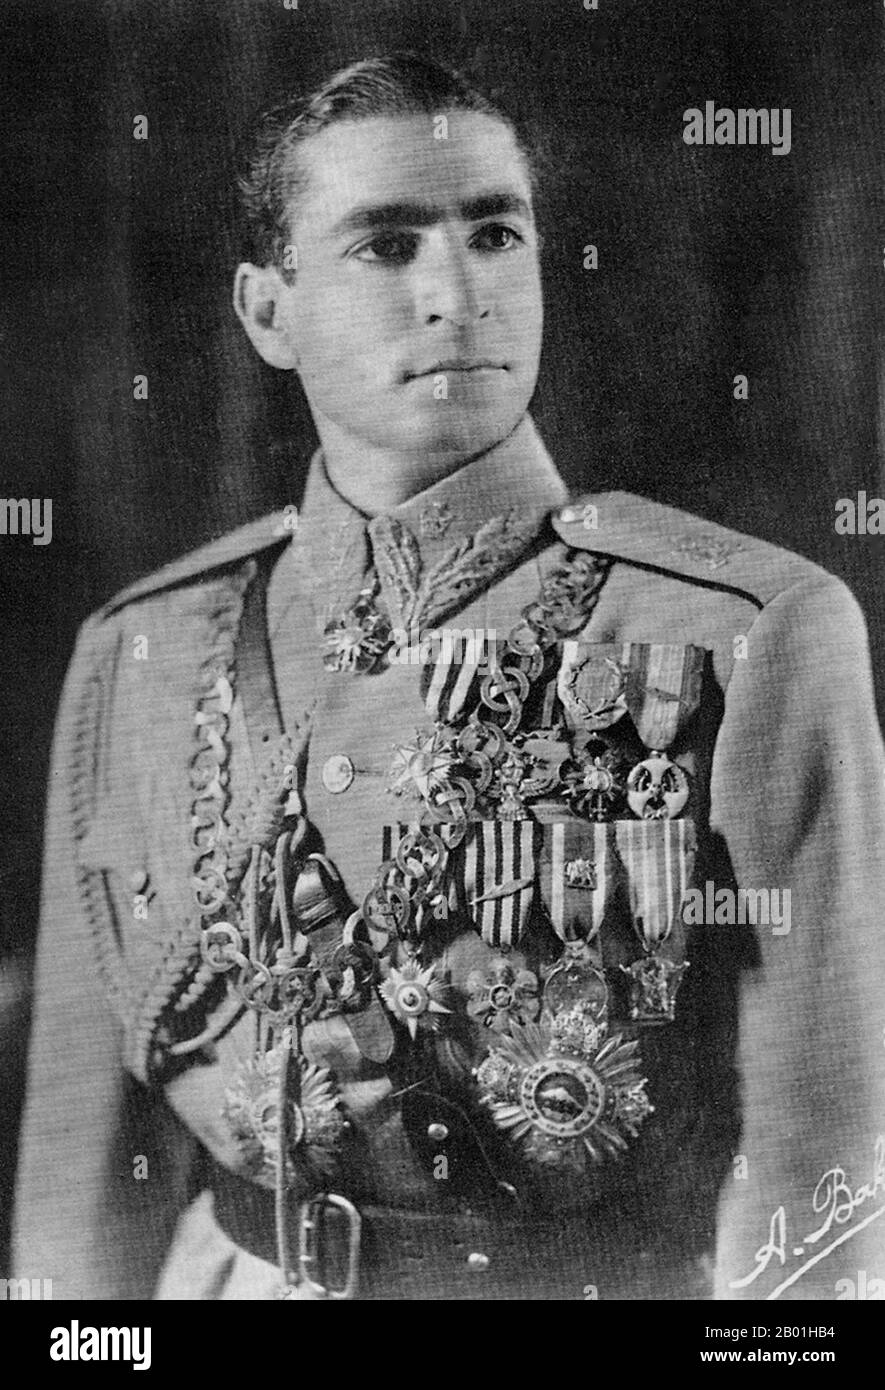 Iran/Persia: Mohammad Rezā Shāh Pahlavi (26 October 1919 - 27 July 1980), Shah of Iran, Shah of Persia (r. 1941-1979), at the age of 21 soon after assuming the throne, 1941.  Mohammad Rezā Shāh Pahlavi ruled Iran from 16 September 1941 until his overthrow by the Iranian Revolution on 11 February 1979. He was the second and last monarch of the House of Pahlavi of the Iranian monarchy. He came to power during World War II after an Anglo-Soviet invasion forced the abdication of his father Reza Shah. During his reign, the Iranian oil industry was nationalised under Prime Minister Mosaddegh. Stock Photo